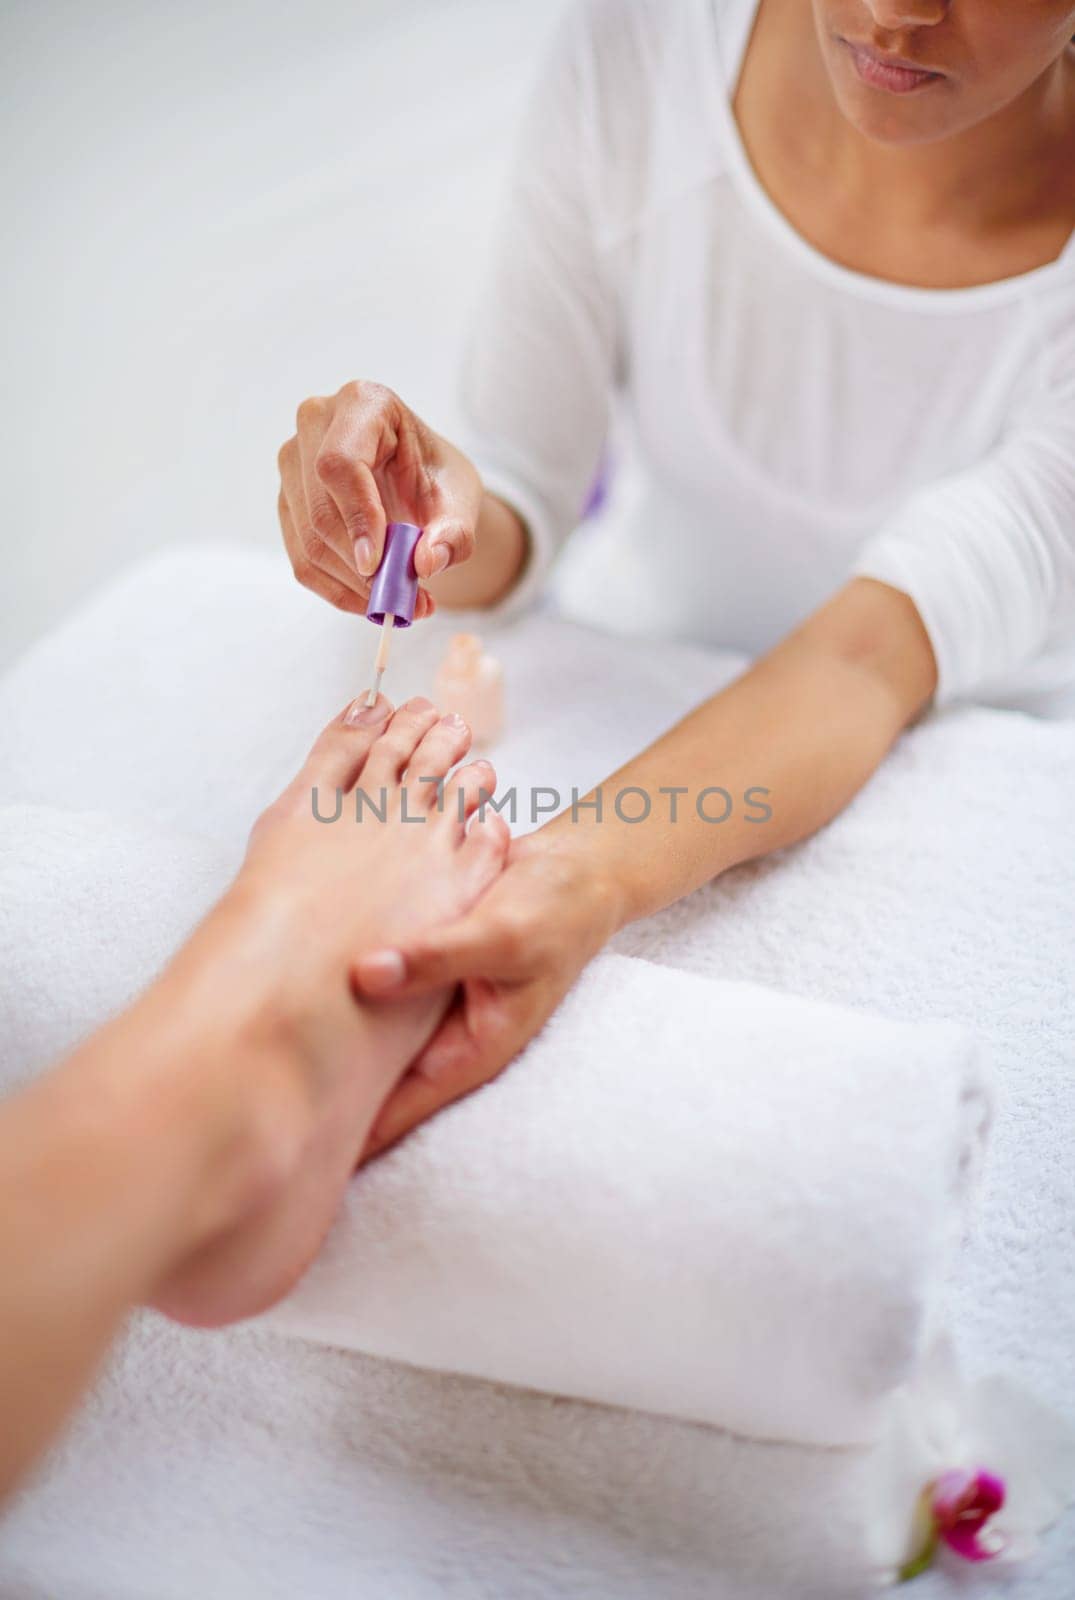 Foot, people and nail polish for pedicure closeup at spa, hands for treatment and skin with dermatology and makeup. Beauty, wellness and cosmetics product for color, self care and cosmetology.